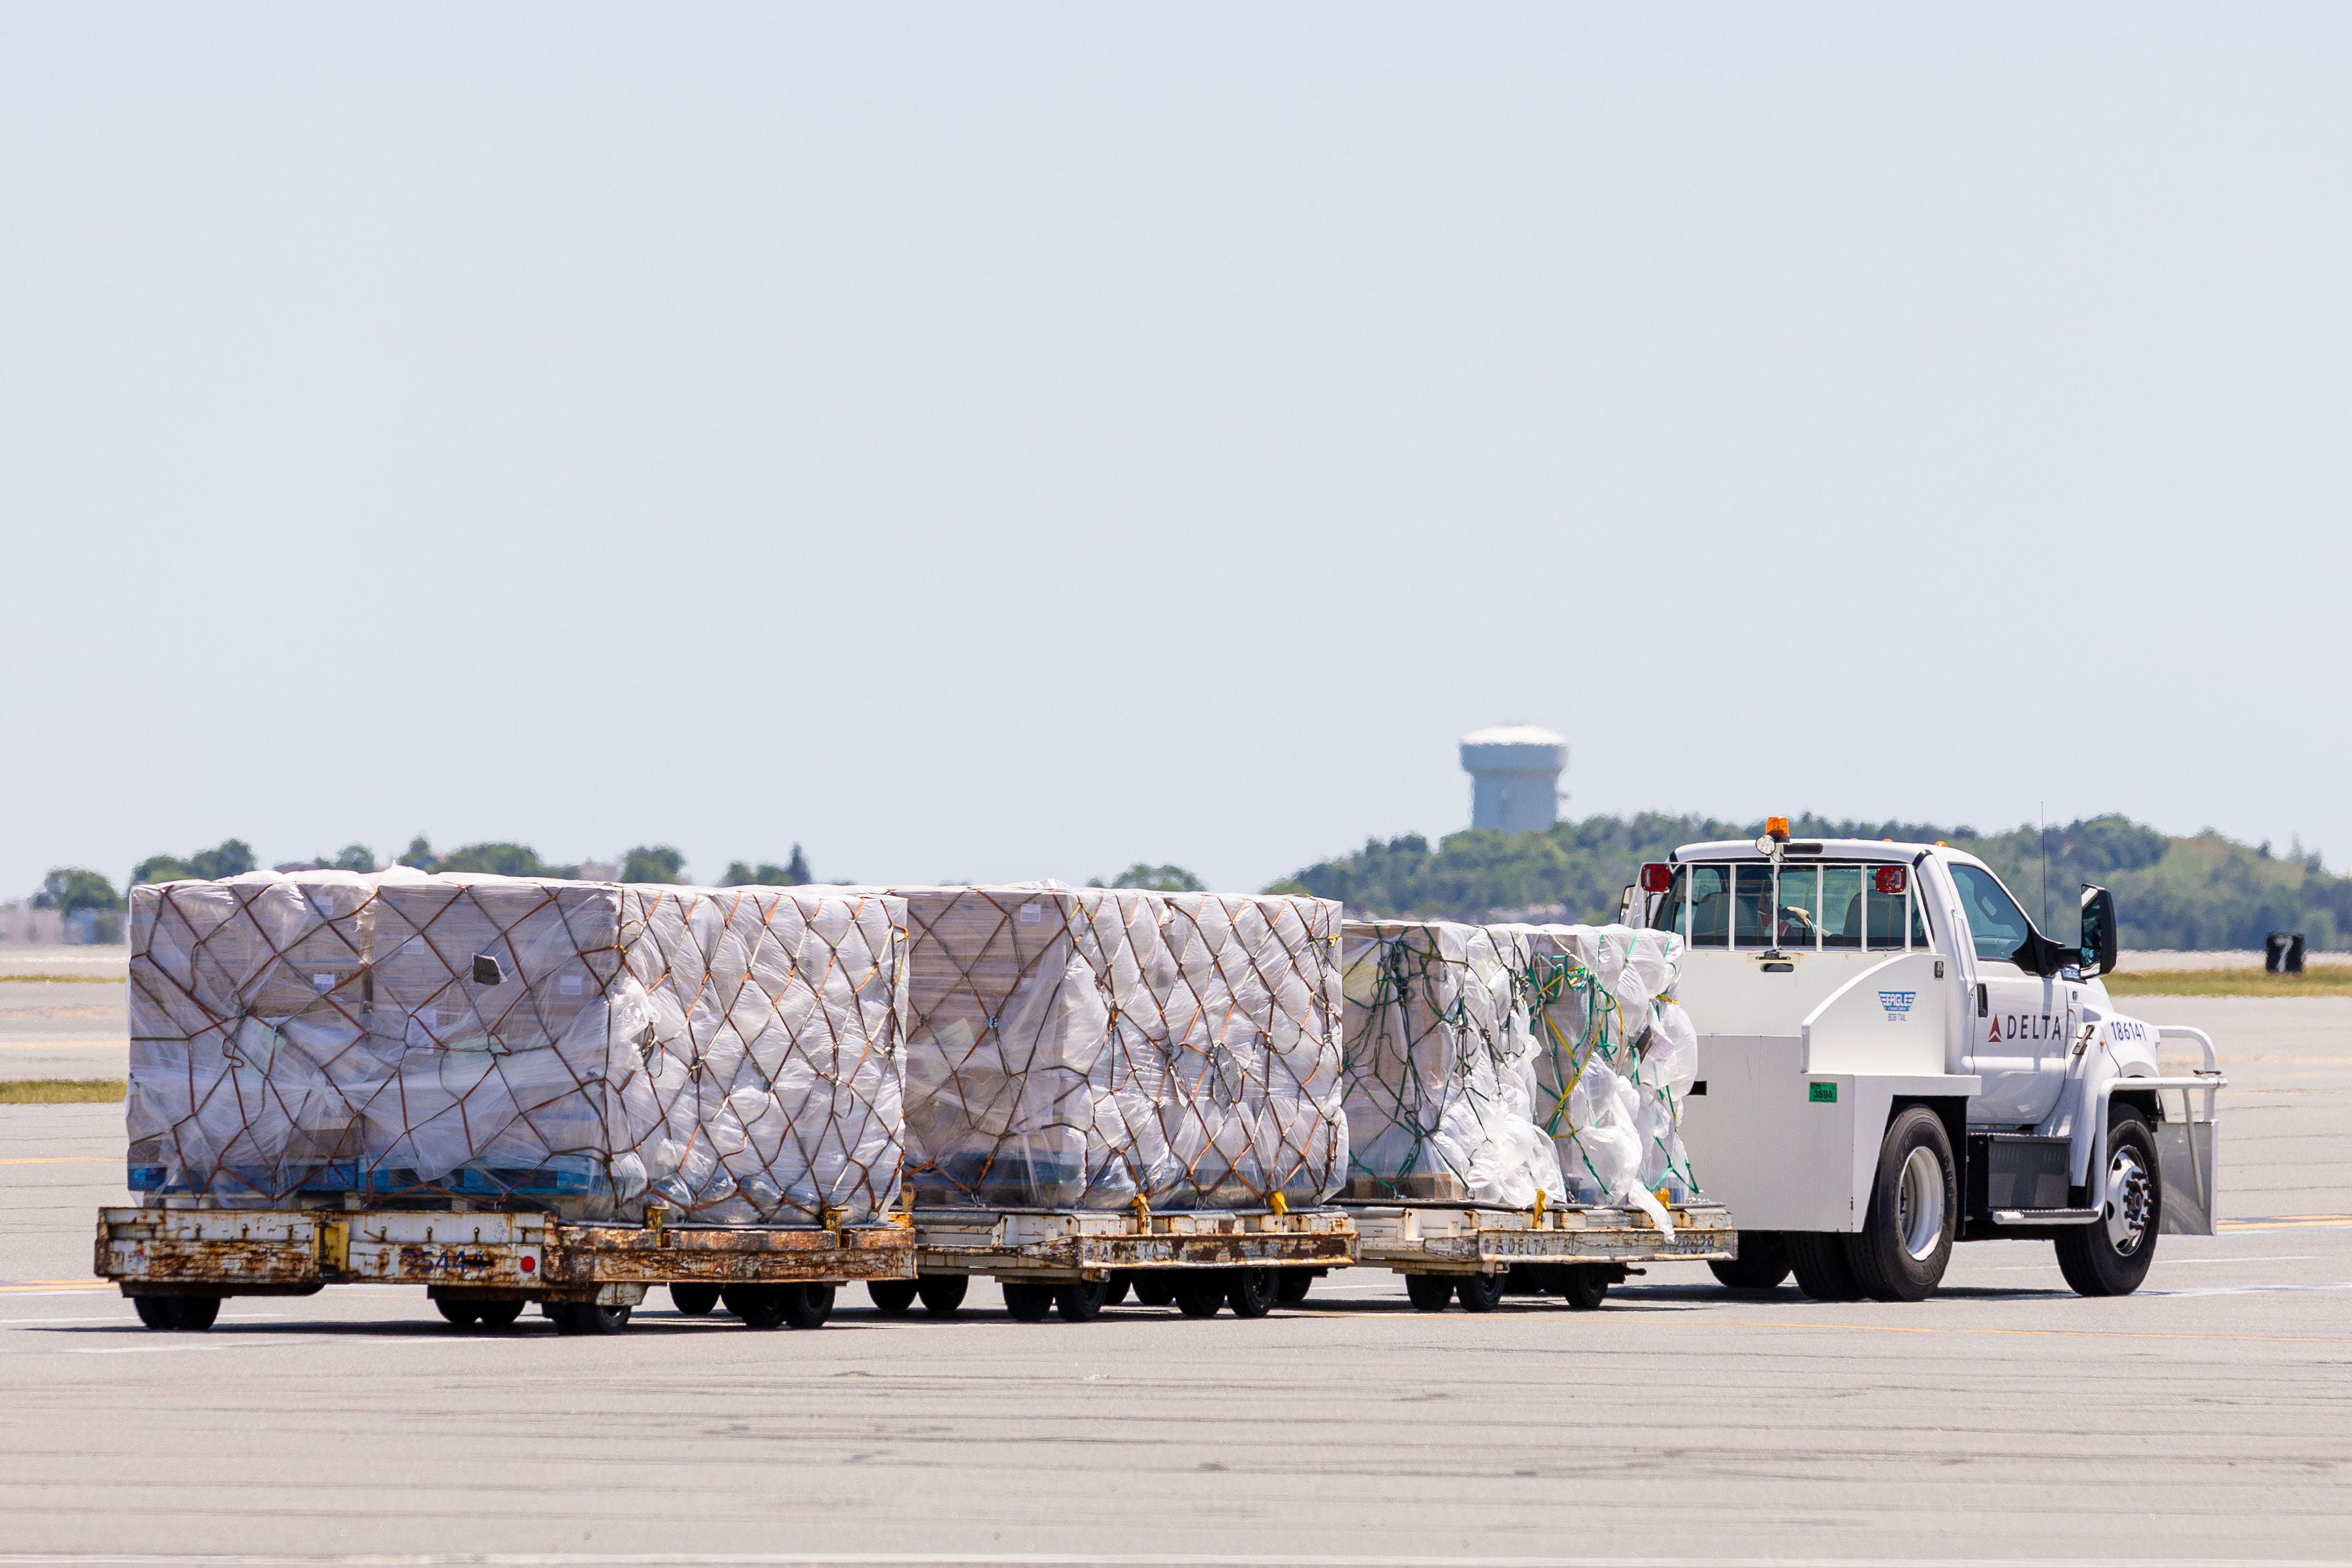 Boston Logan Airport receives a shipment of baby formula sent from LHR.